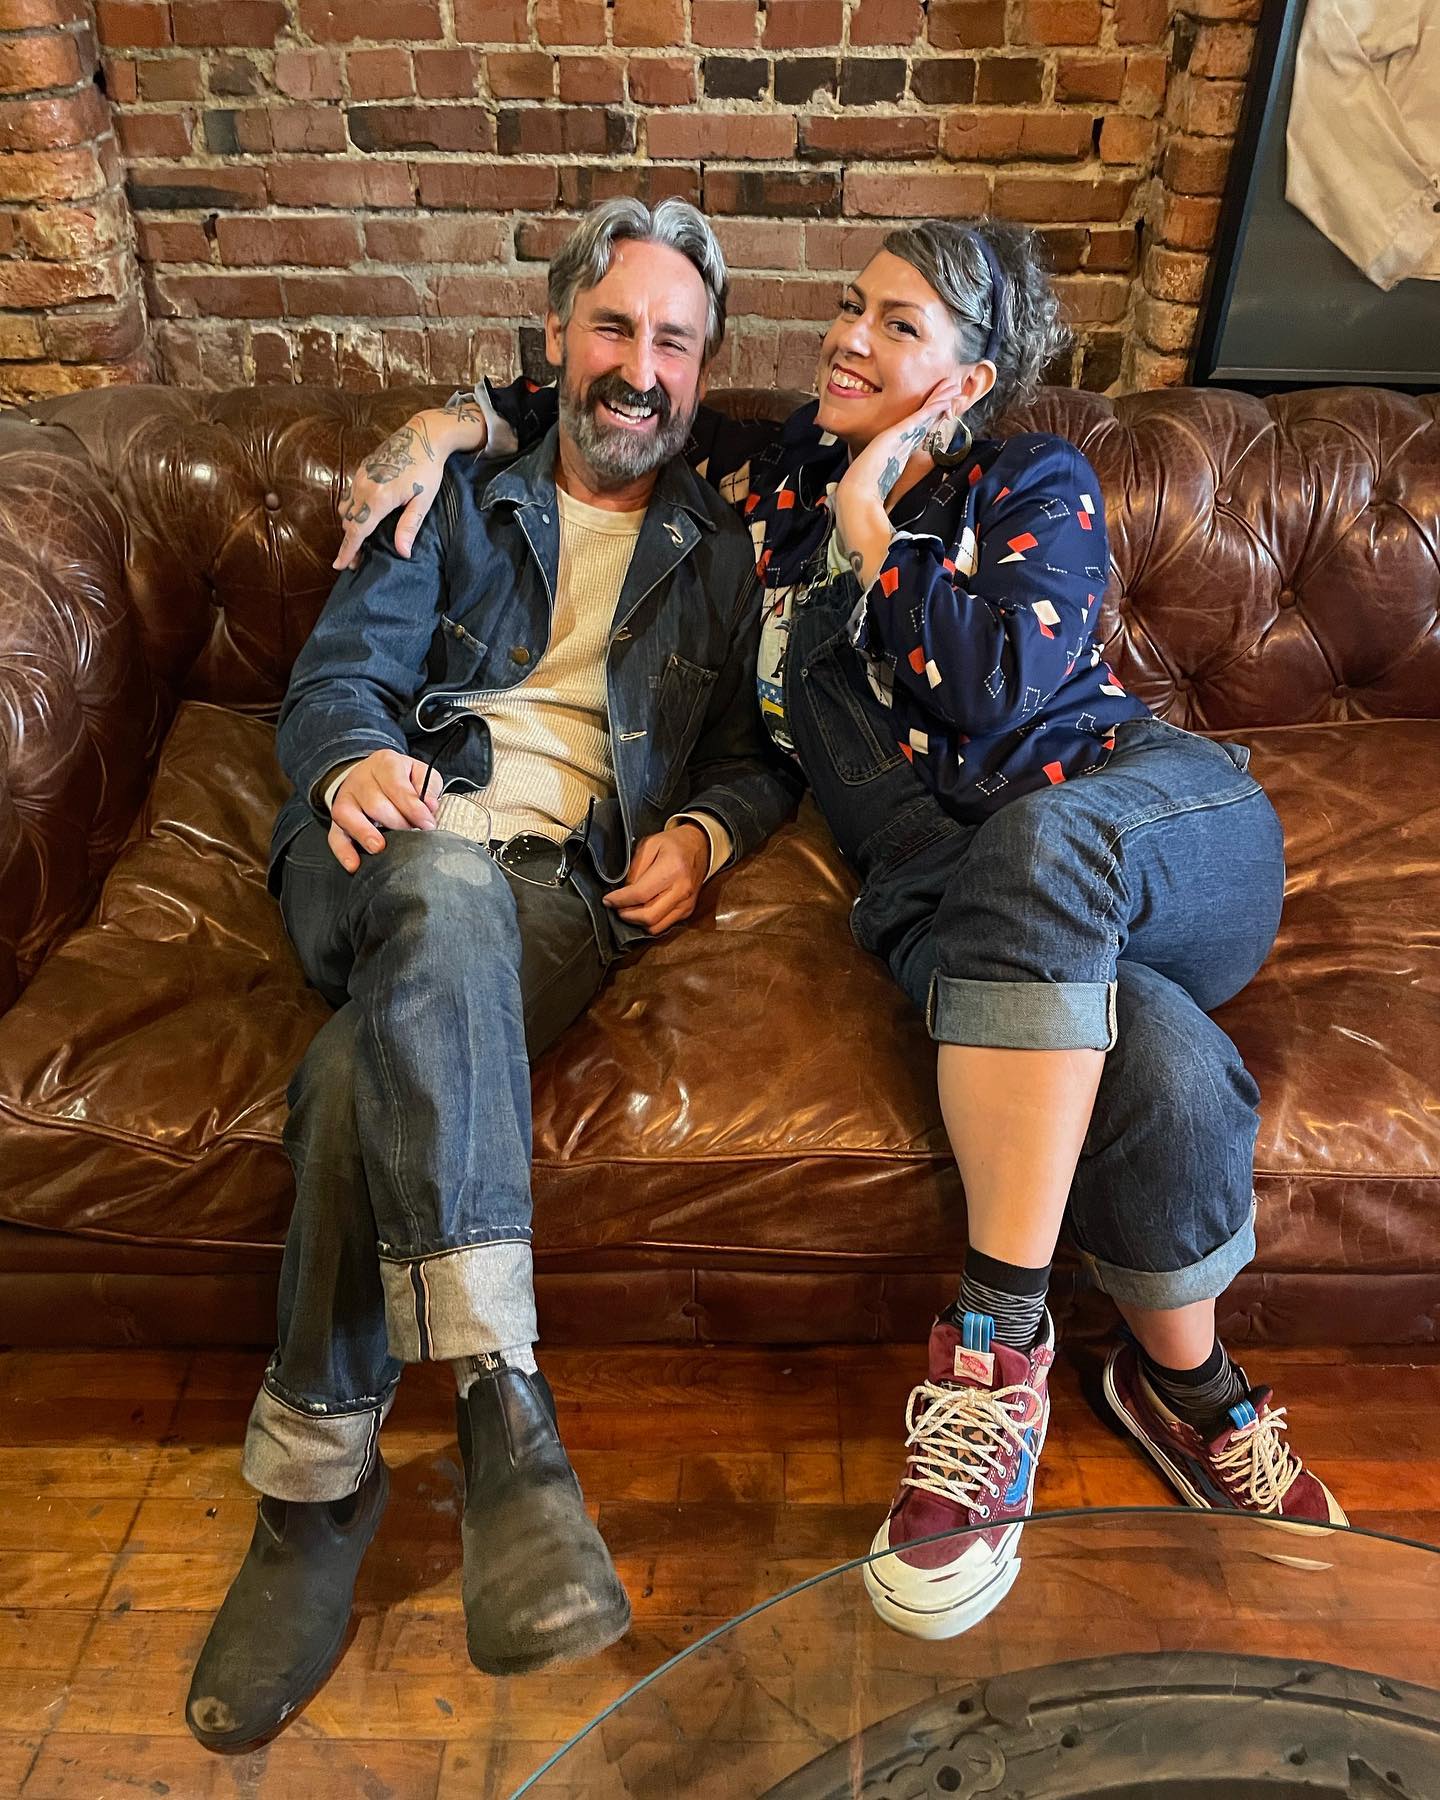 Danielle Colby poses with Mike Wolfe while sitting on a brown leather couch